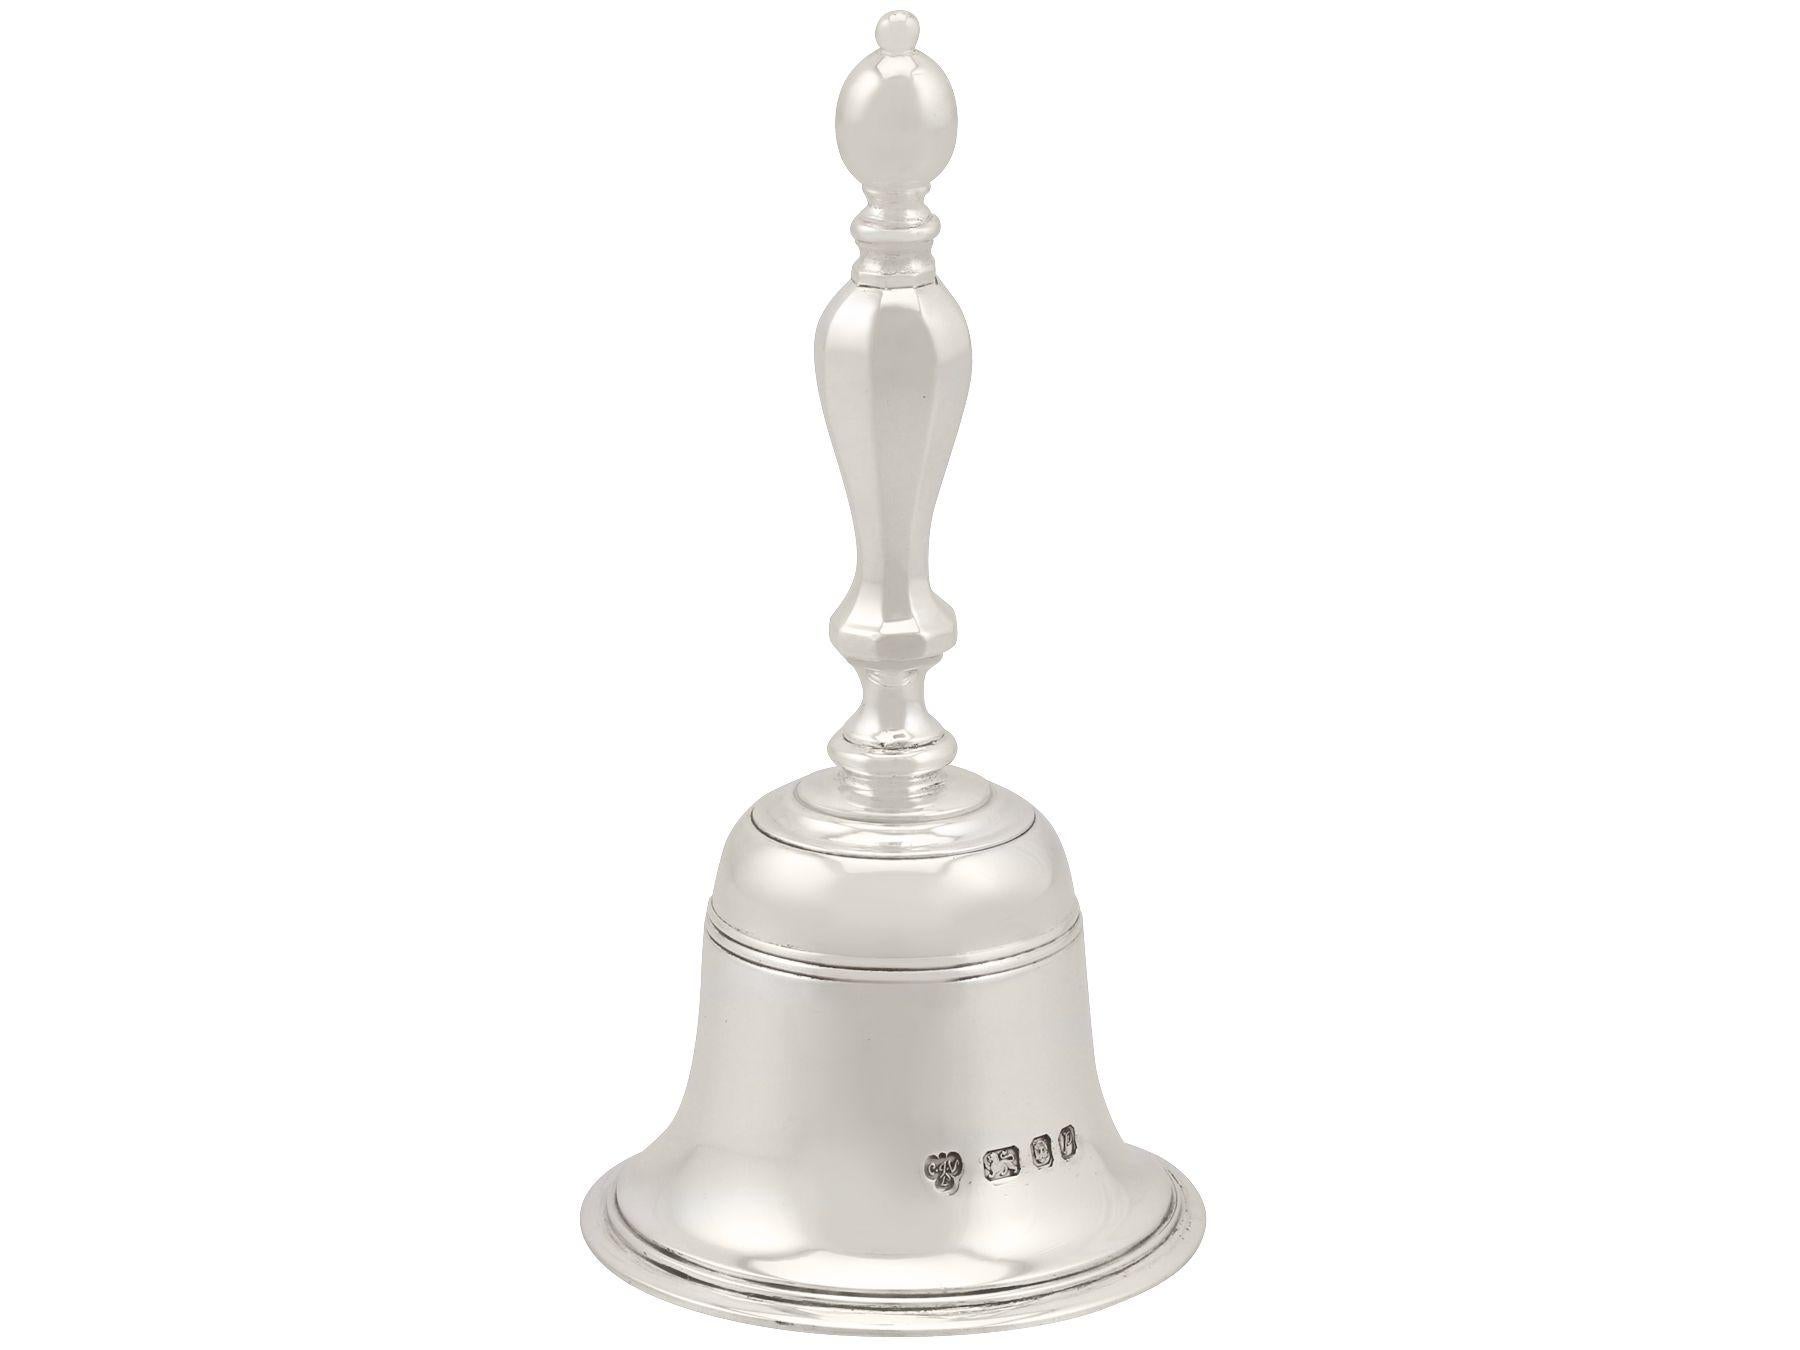 An exceptional, fine and impressive vintage English sterling silver table bell, an addition to our range of ornamental silverware

This vintage Elizabeth II cast sterling silver table bell has a plain bell shaped form.

The surface of this vintage